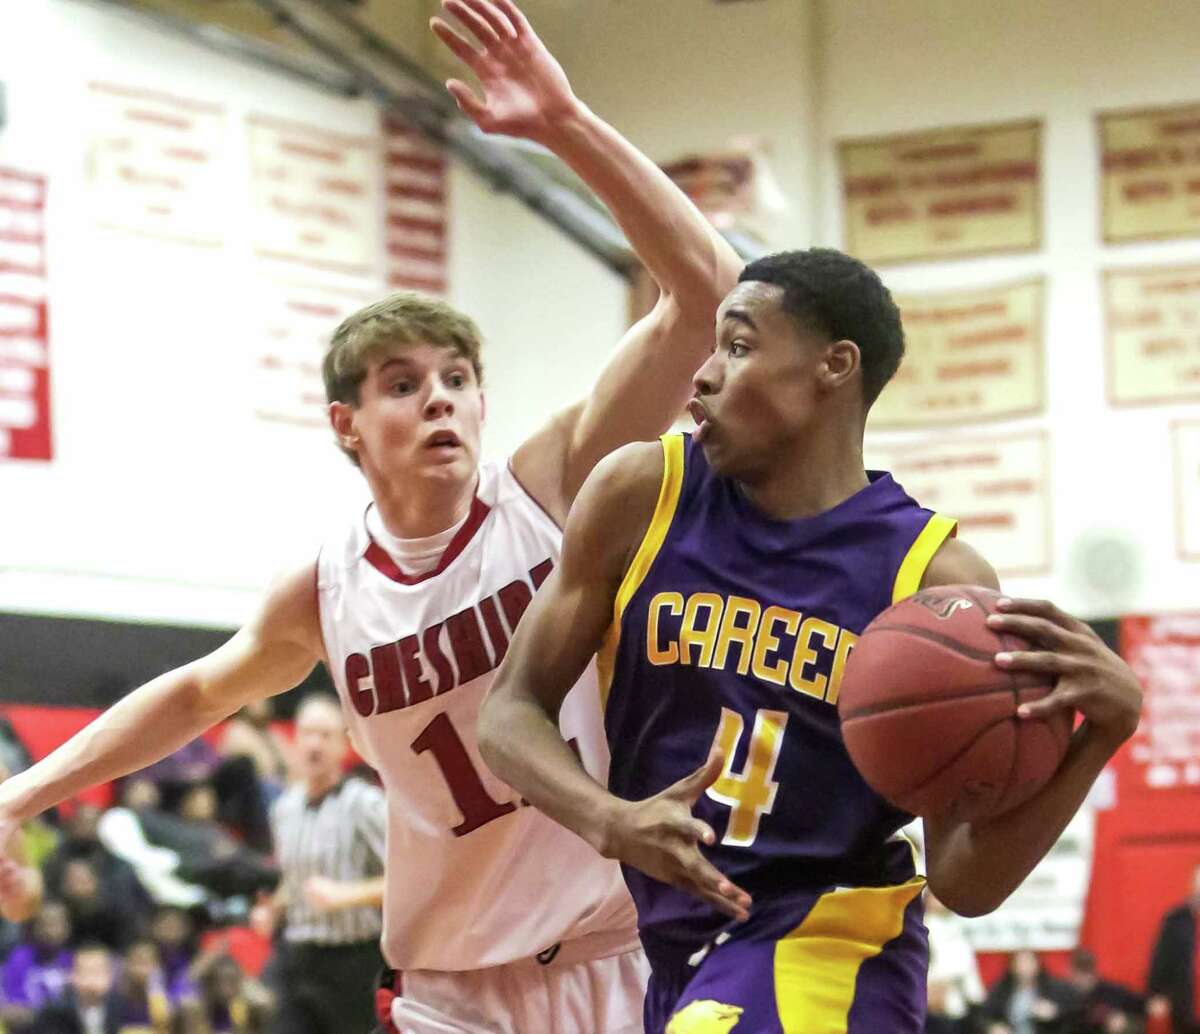 Career guard Tyreek Perkins dribbles thru the lane against Cheshire’s Reid Duglenski in a game played last month. Career has already clinched the SCC Oronoque Division title while Cheshire has clinched a tie in the SCC Housatonic Division.